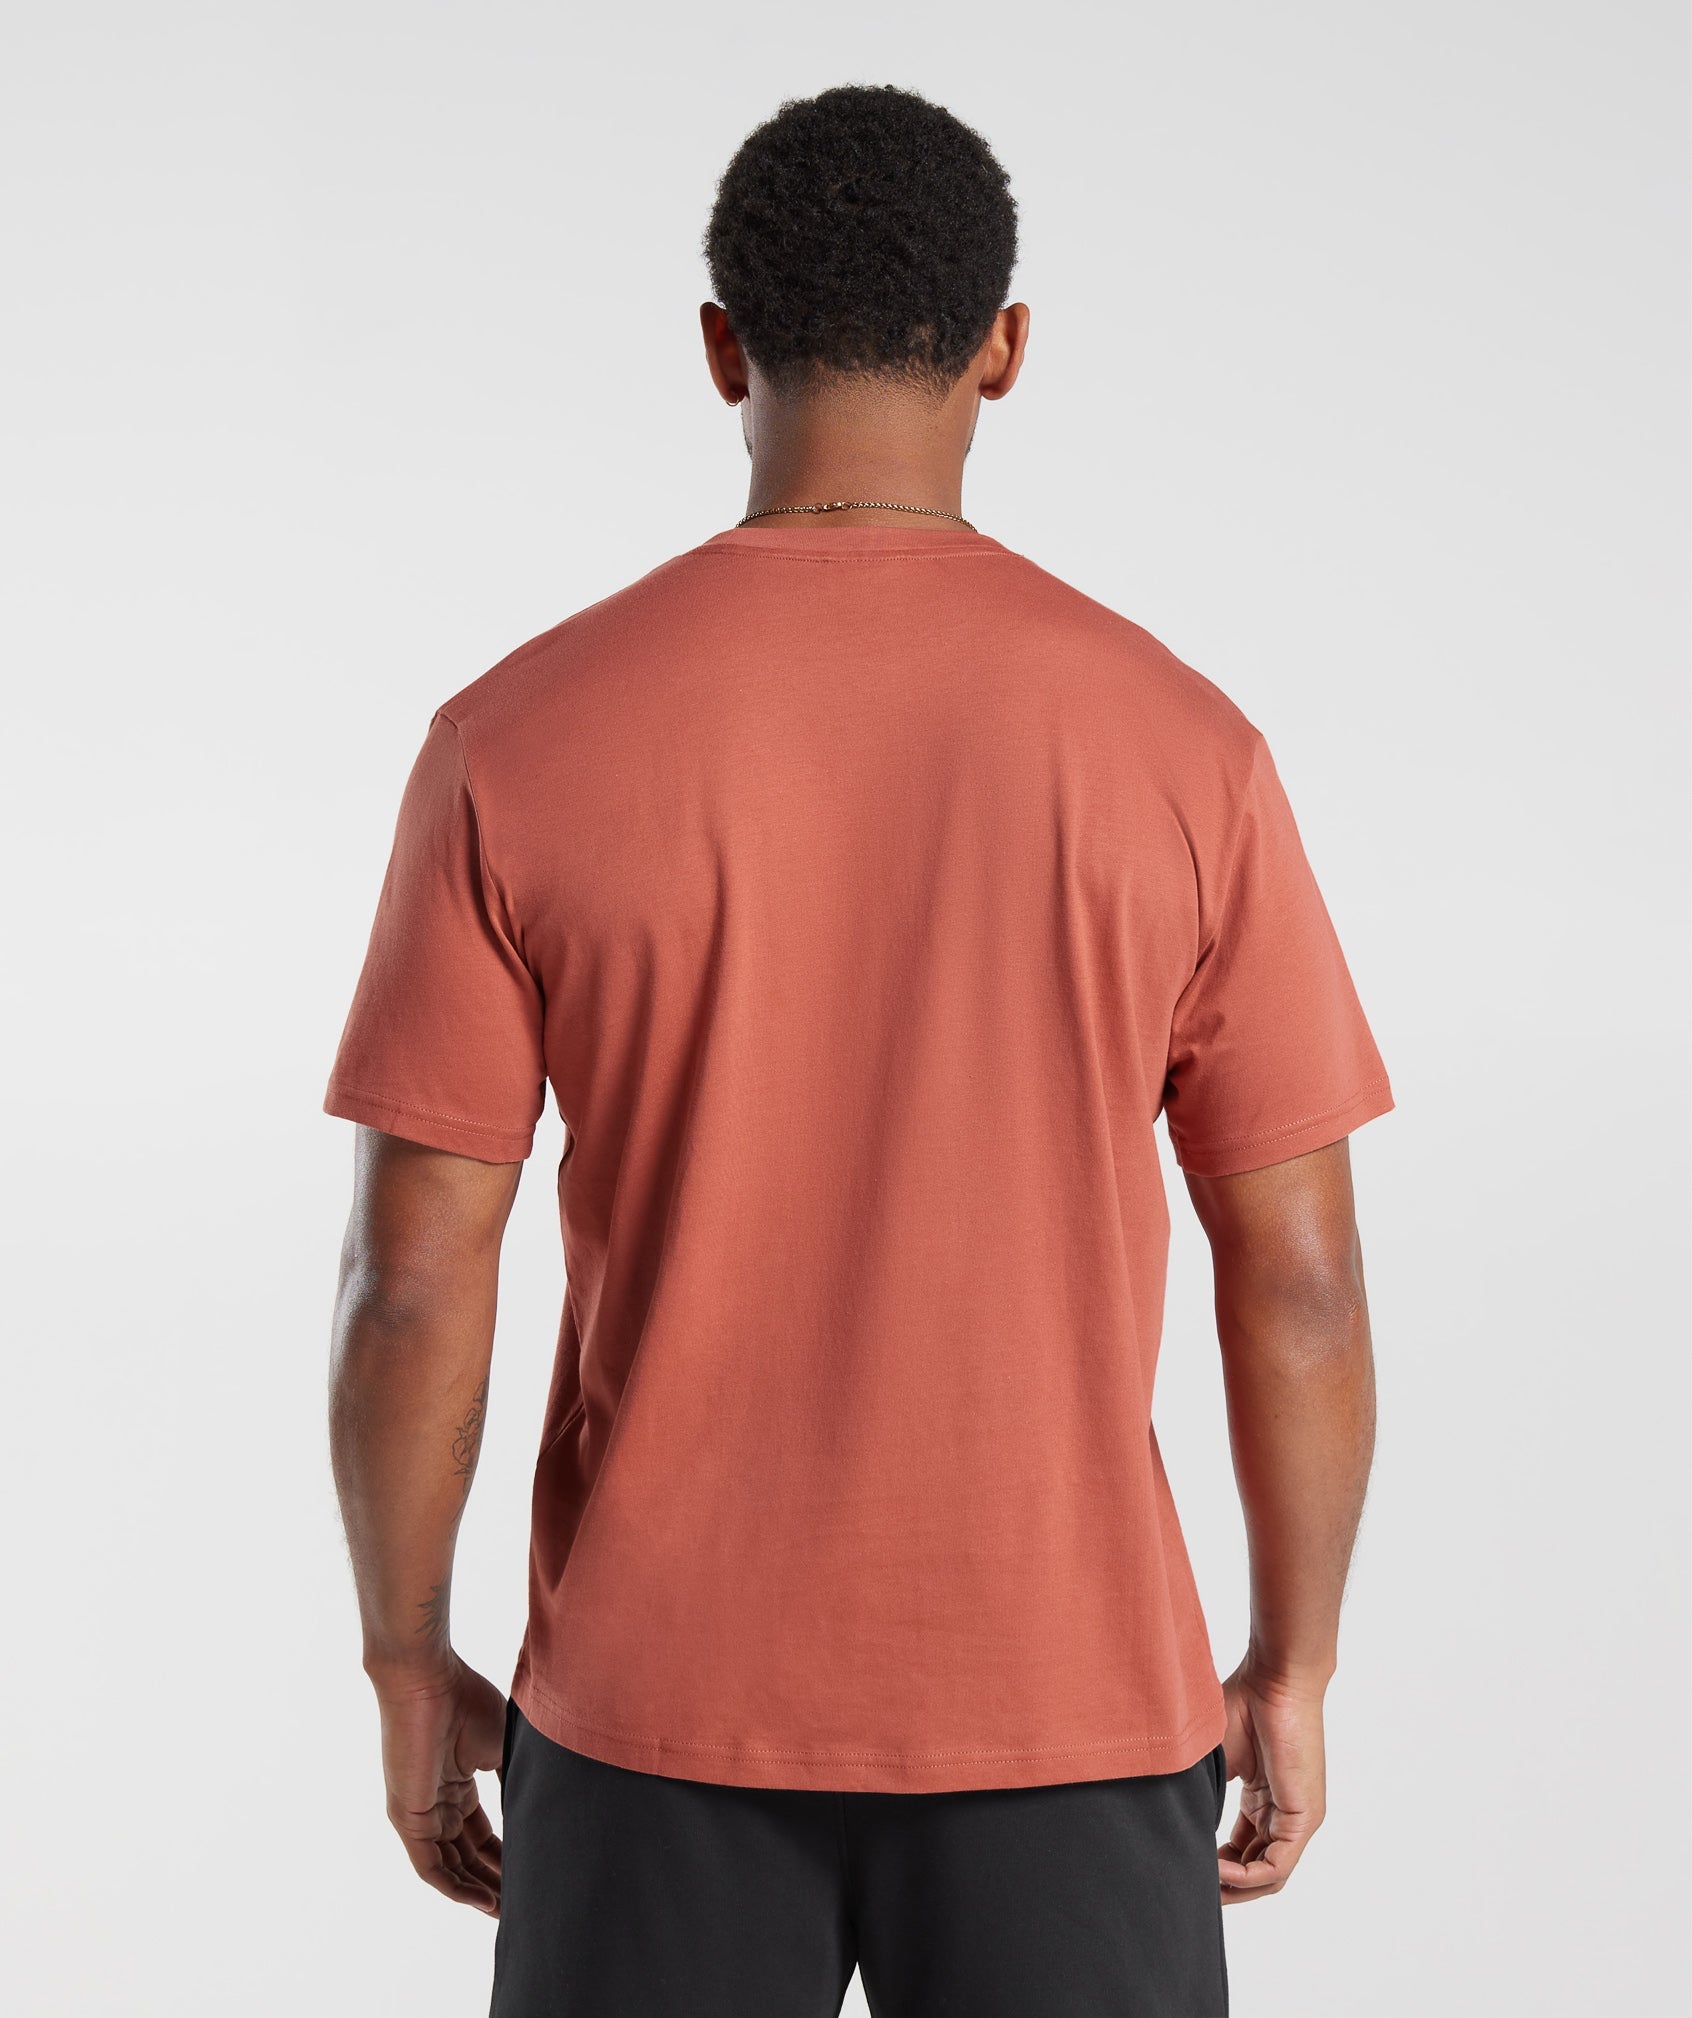 Crest T-Shirt in Persimmon Red - view 2